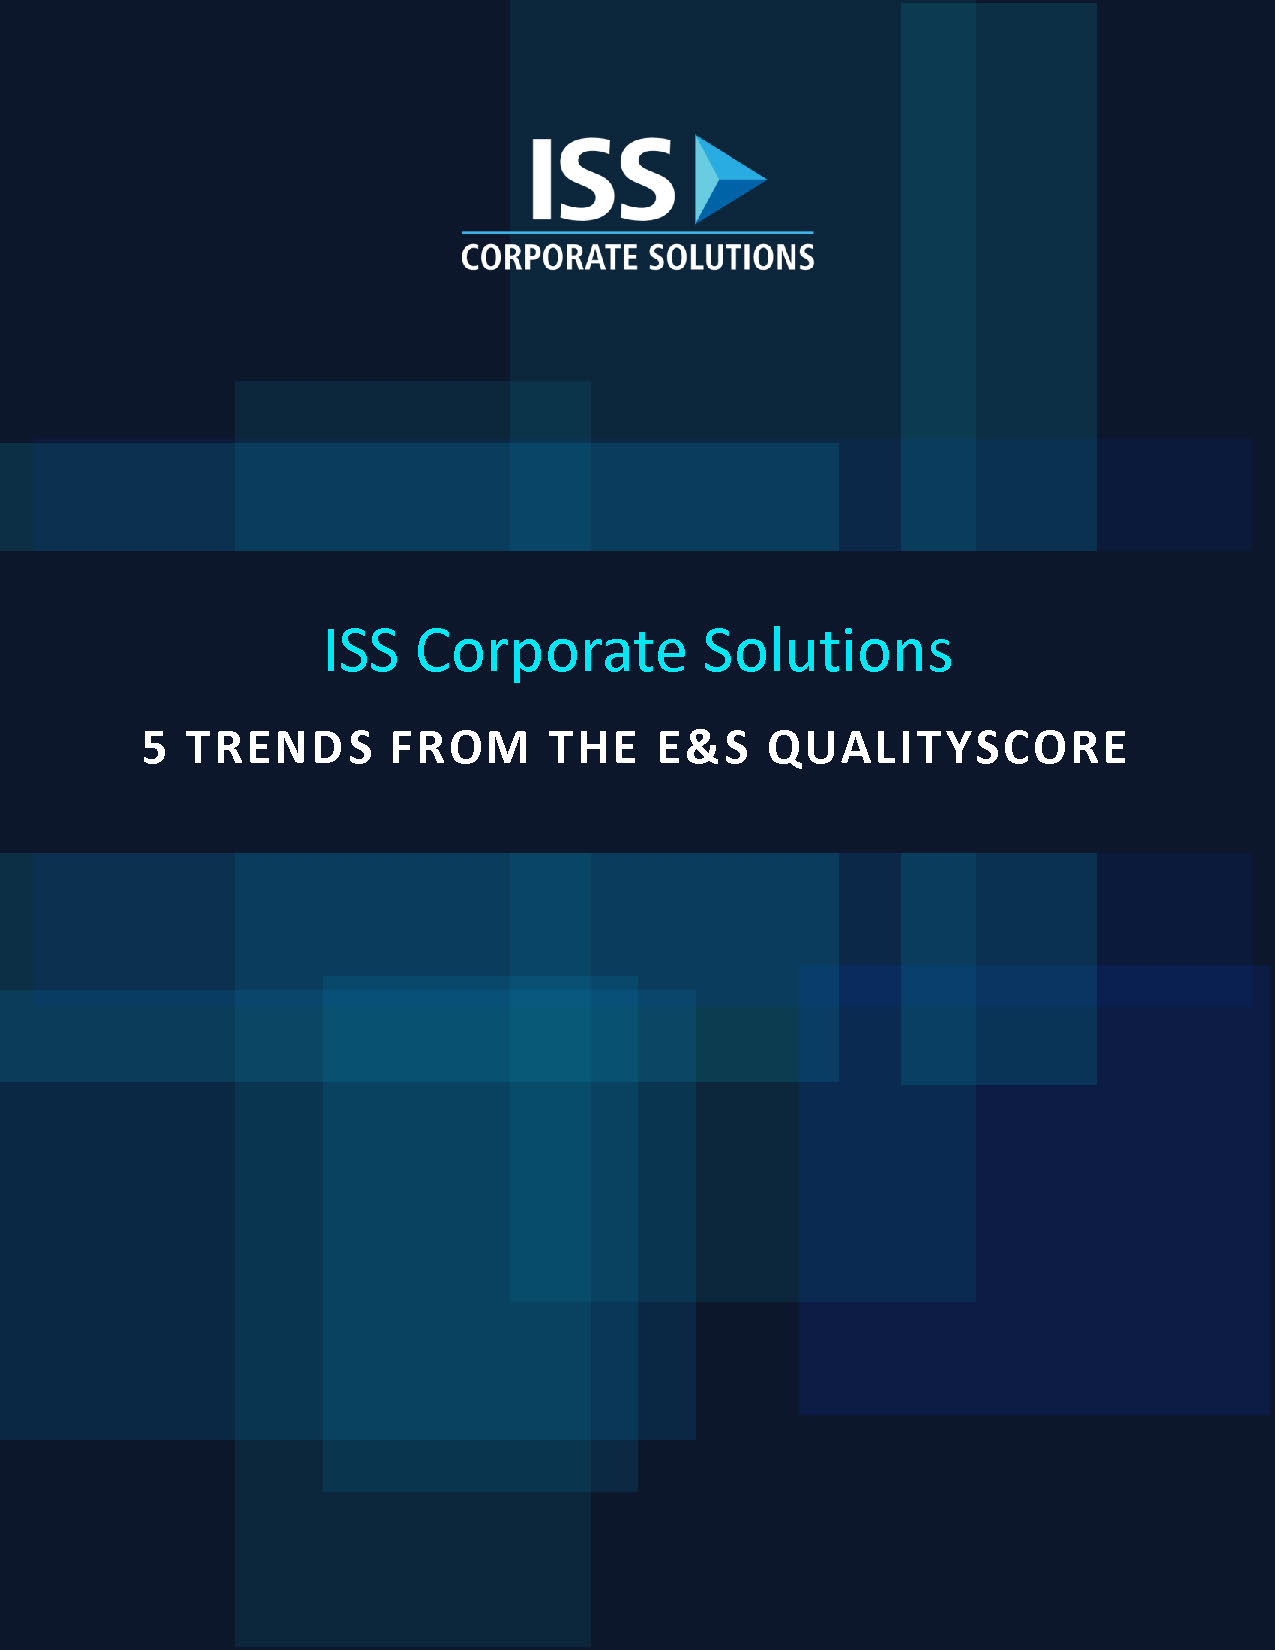 5 Trends from the E&S QualityScore